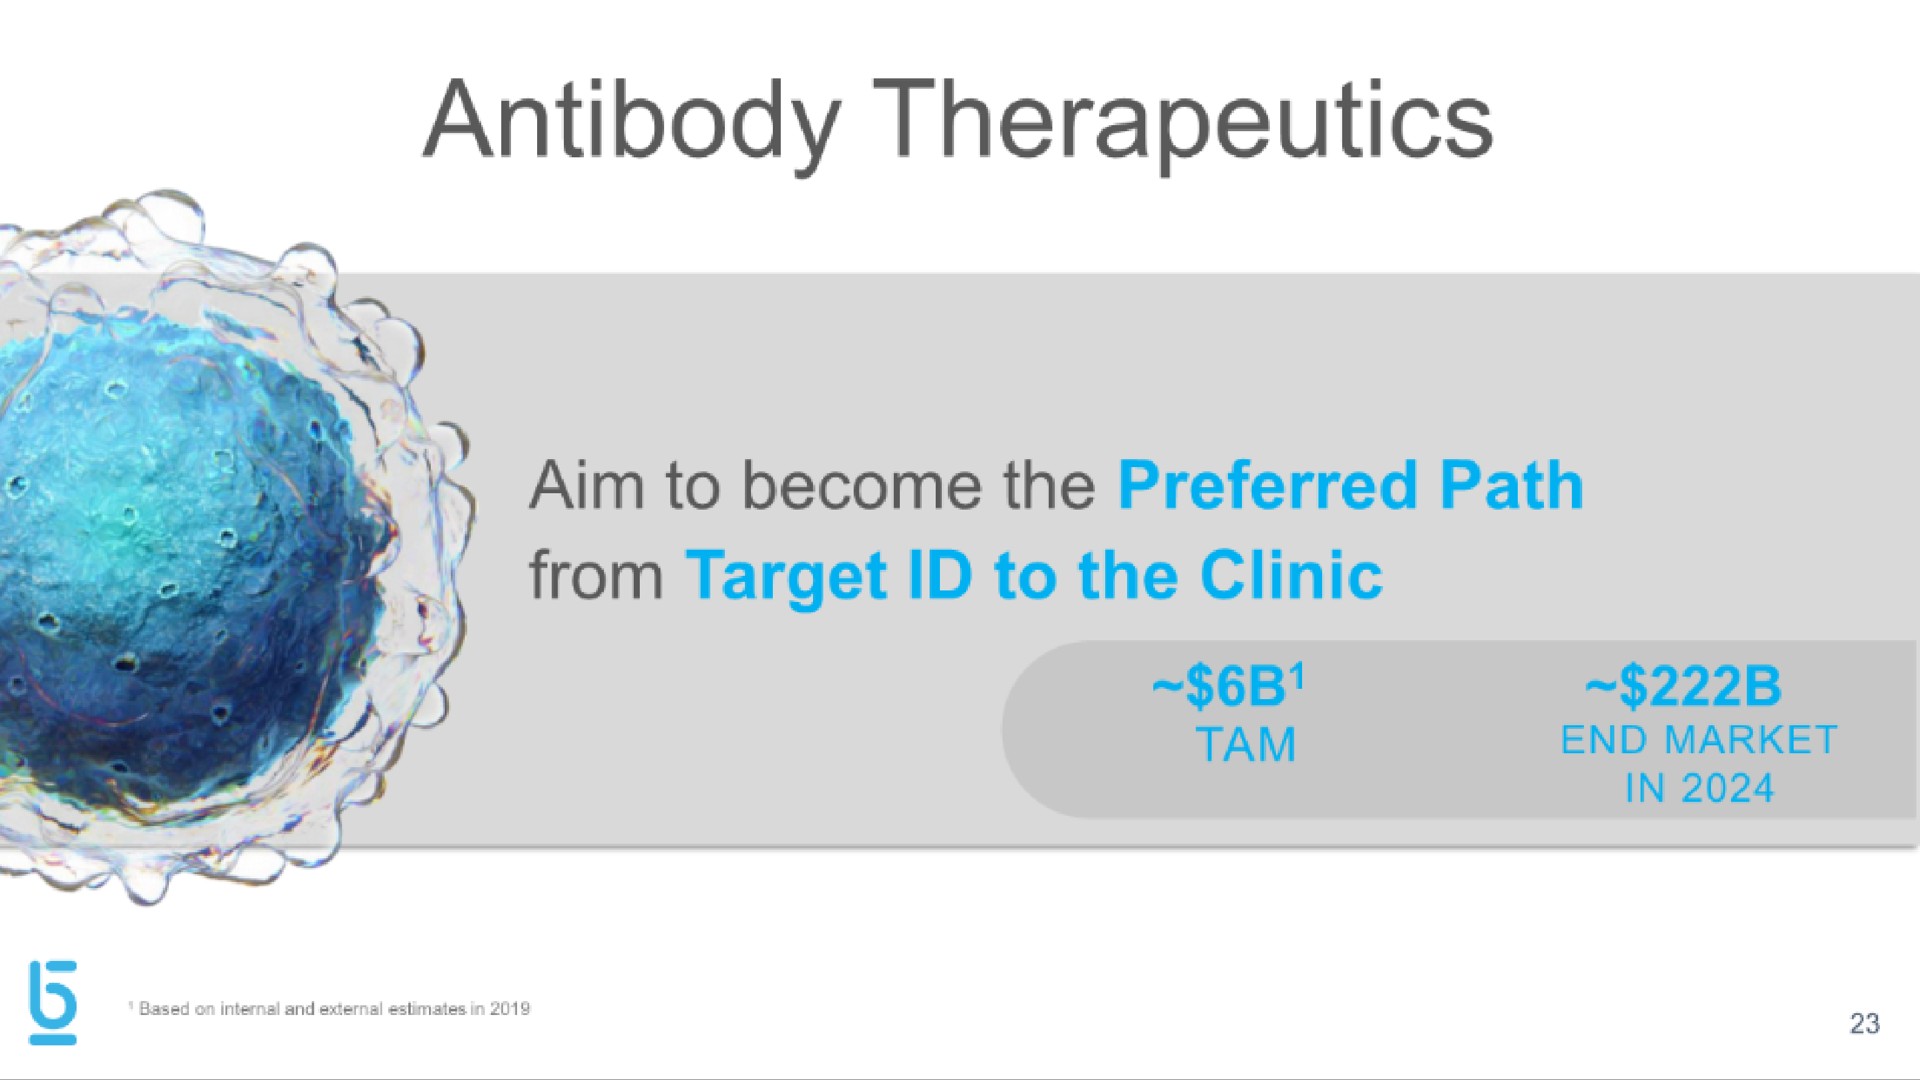 antibody therapeutics aim to become the preferred path from target to the clinic | Berkeley Lights